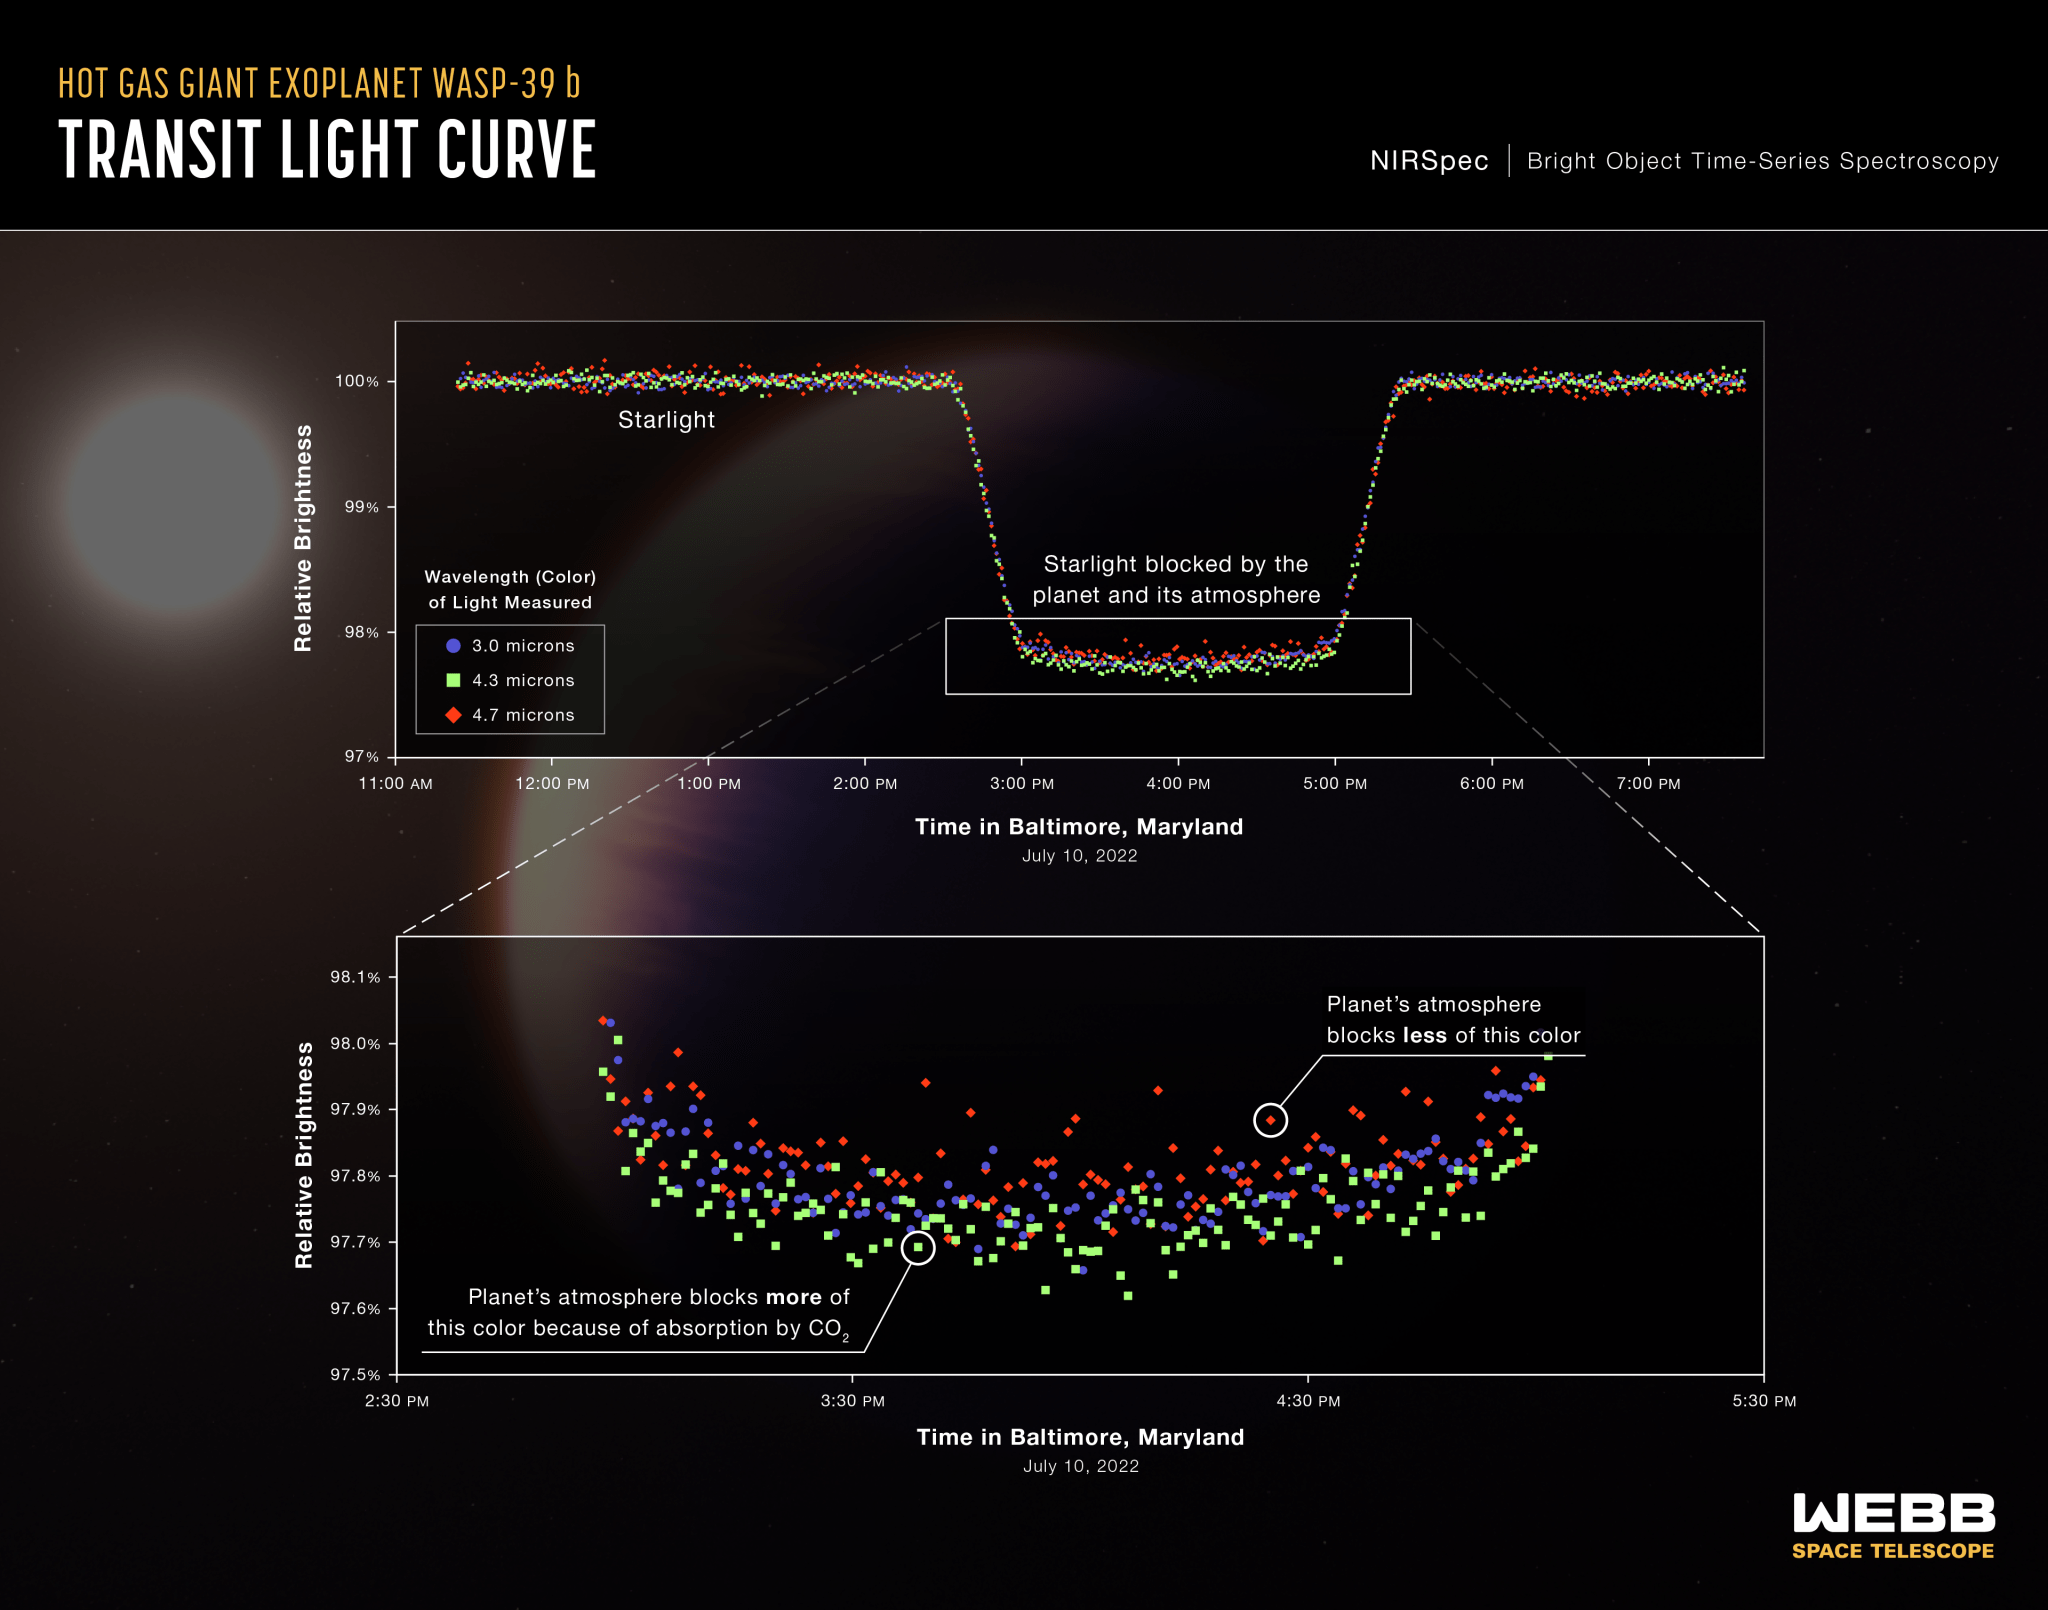 Graphs of relative brightness of 3 different wavelengths of light versus time. Top graph forms a U-shaped valley showing a period of decreased brightness. The valley floor shows that the amount of dimming differs for the 3 different wavelengths.